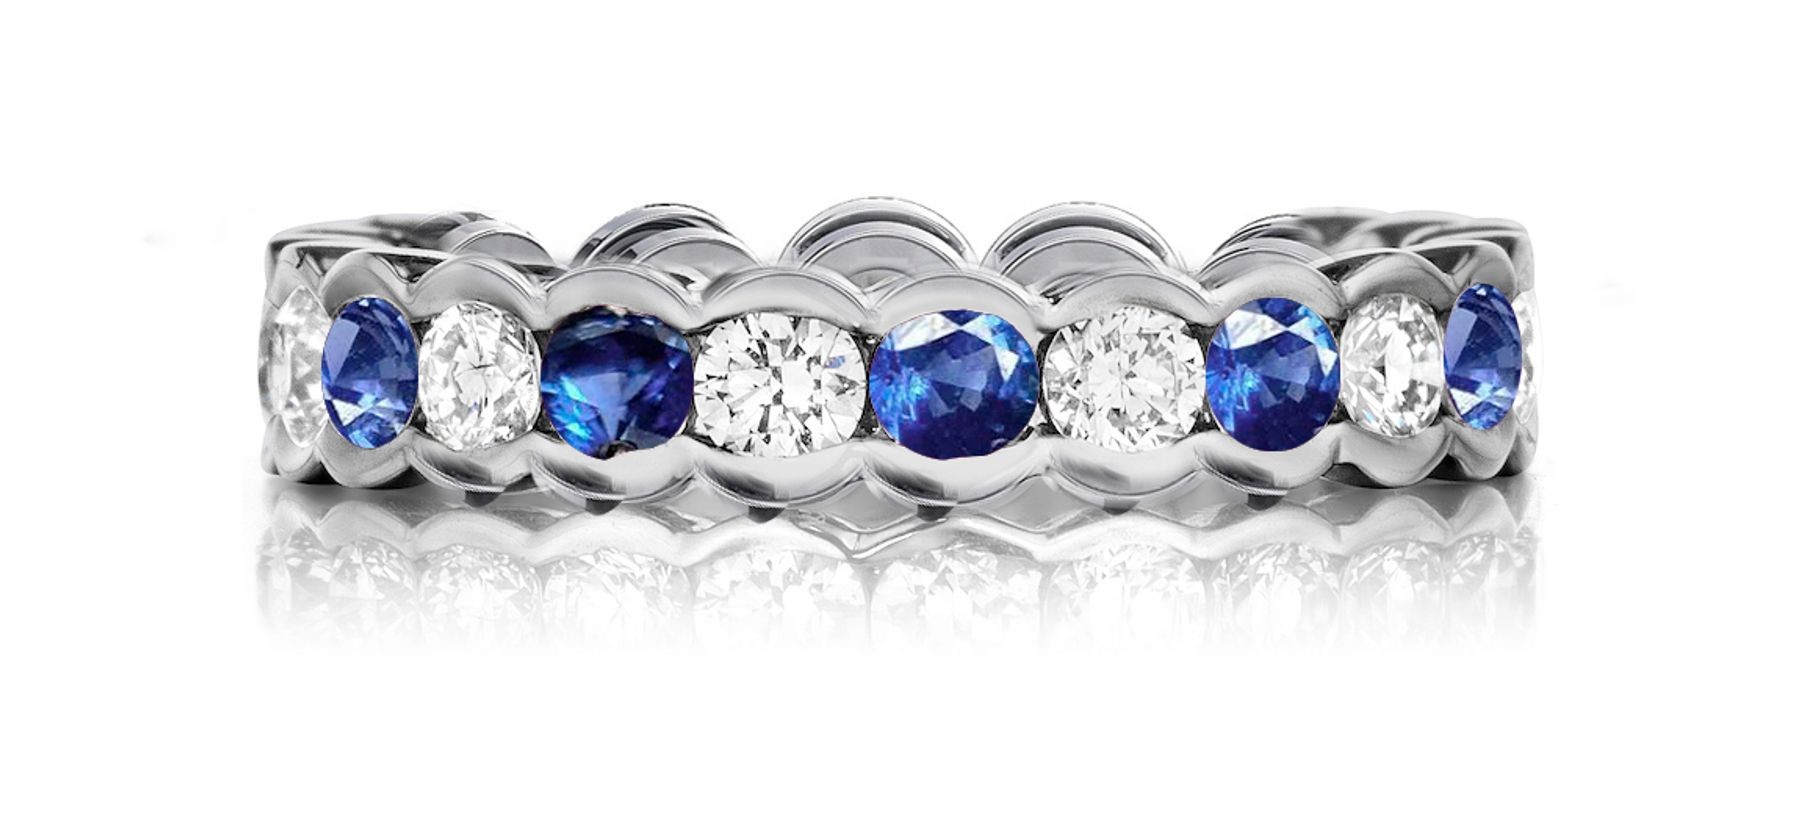 Expertly Crafted Precision Set High Quality Diamond & Sapphire Eternity Band Rings